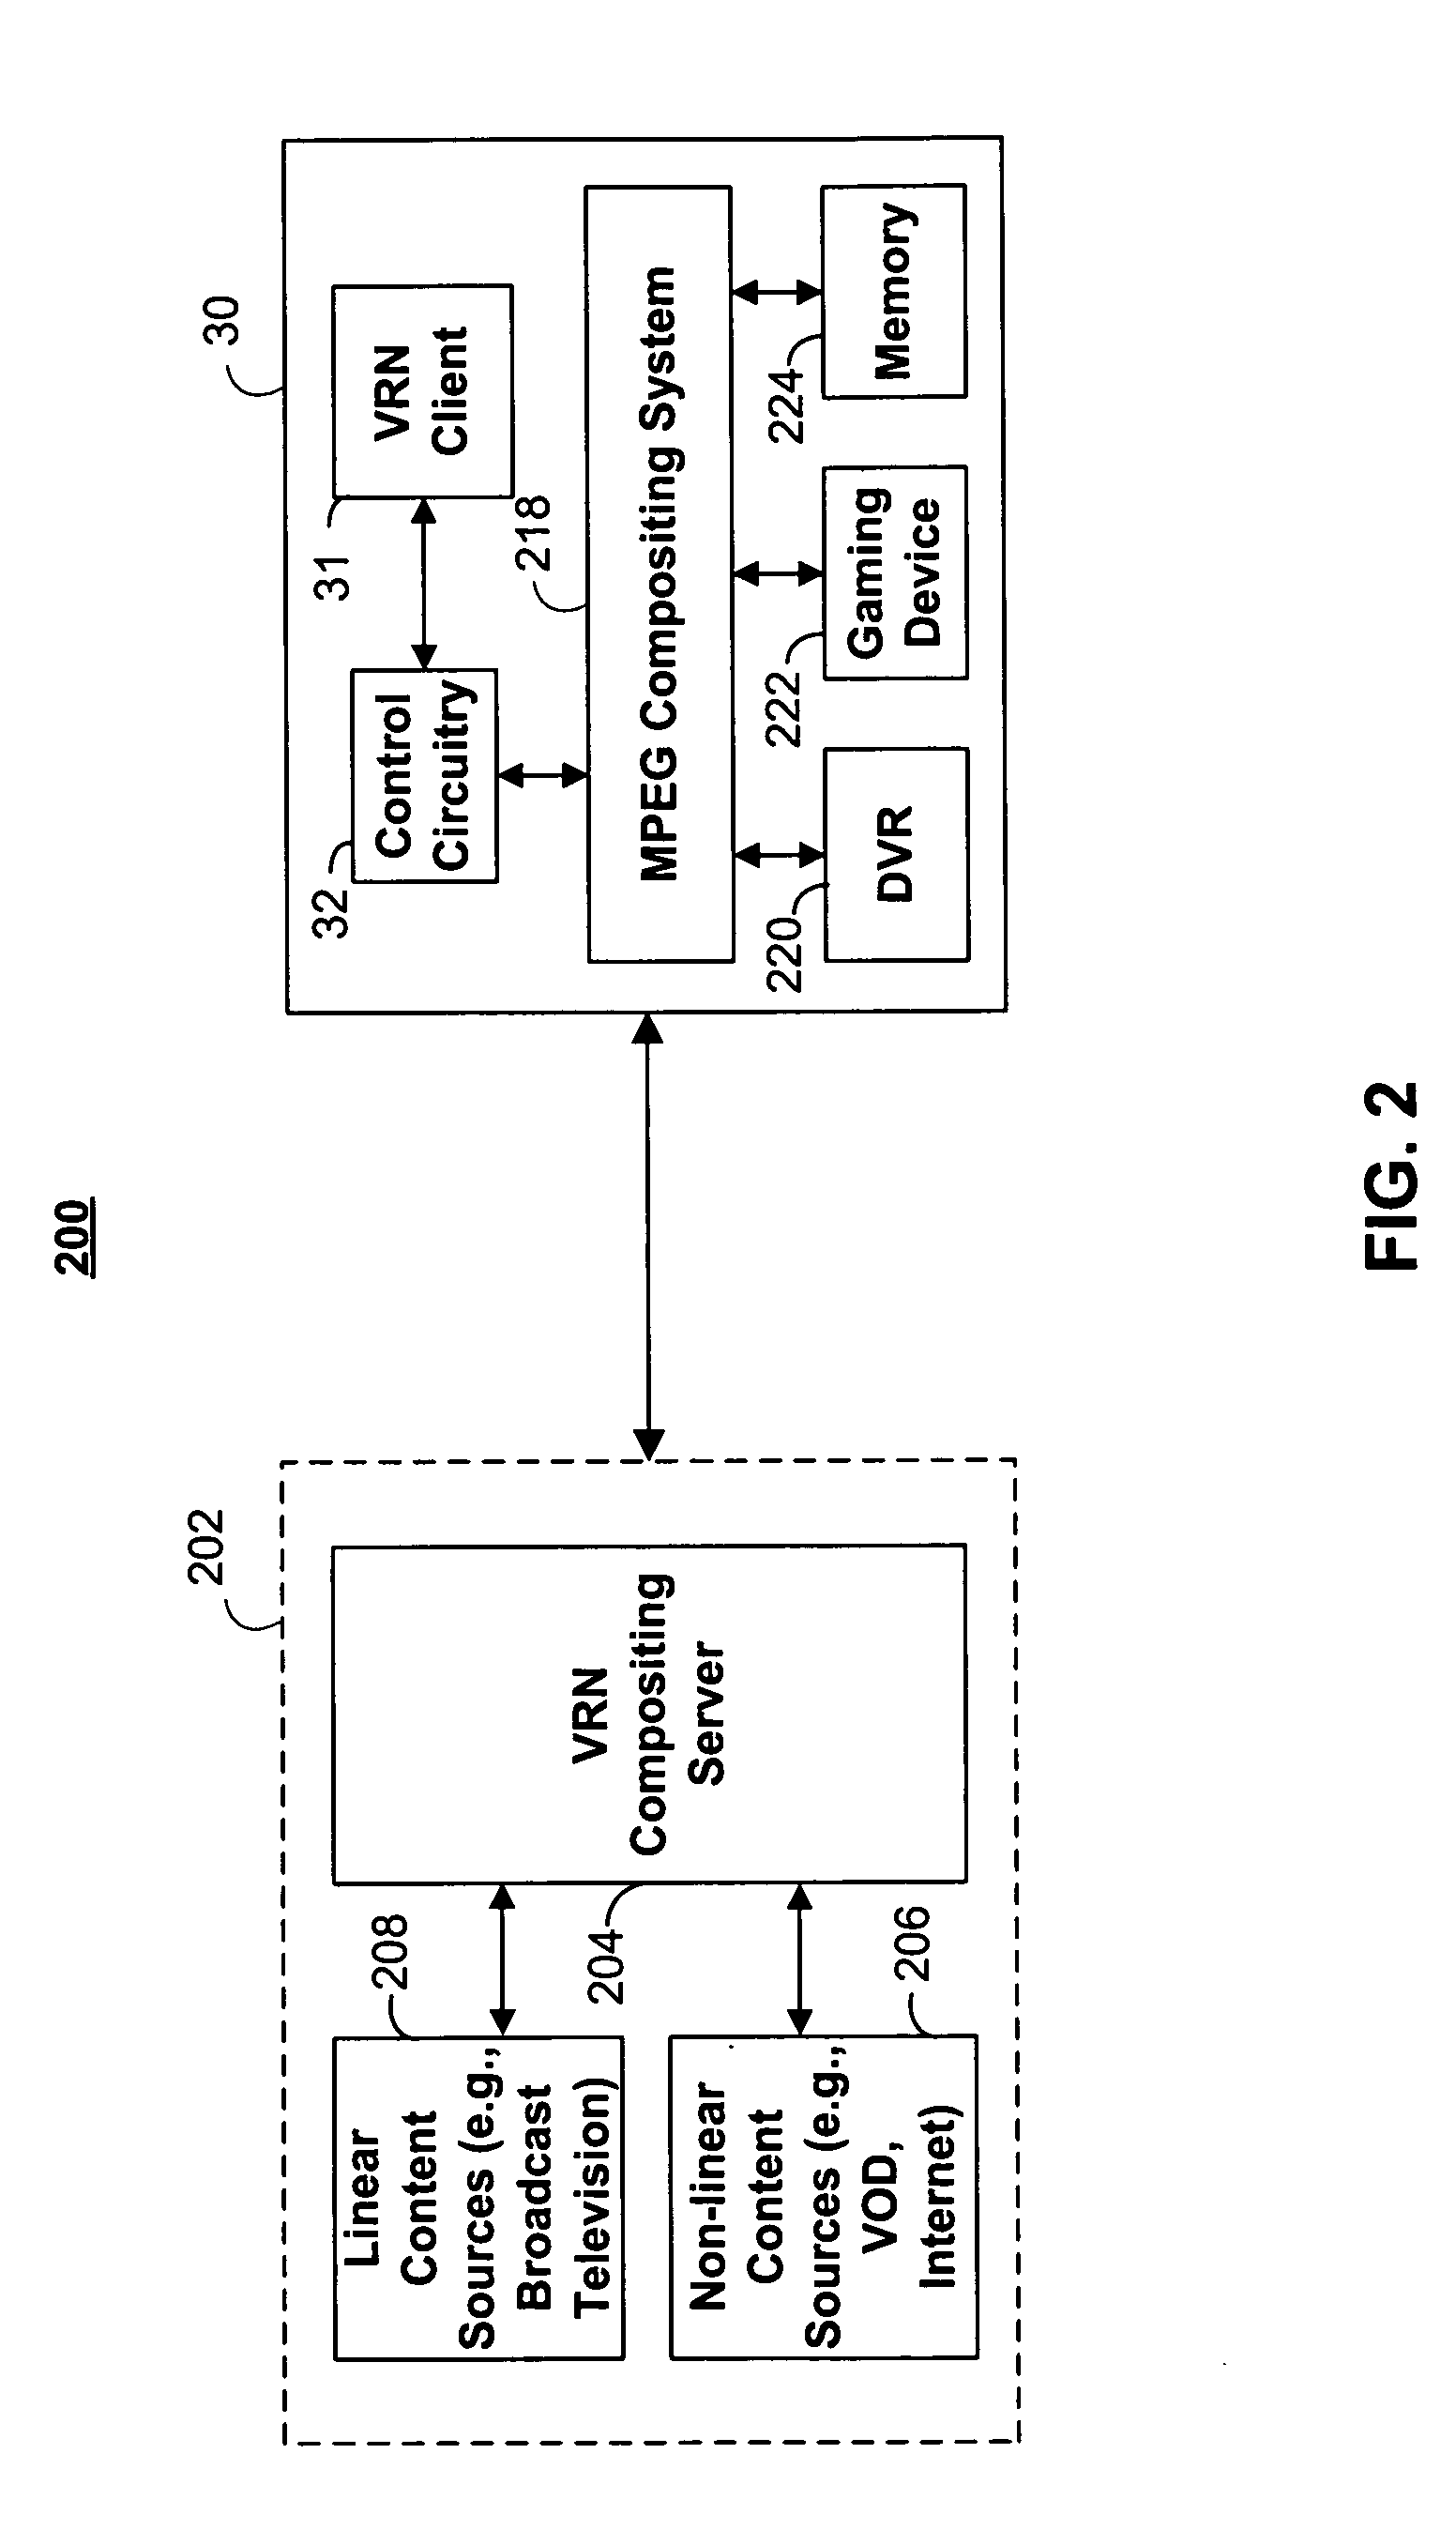 Systems and methods for creating custom video mosaic pages with local content